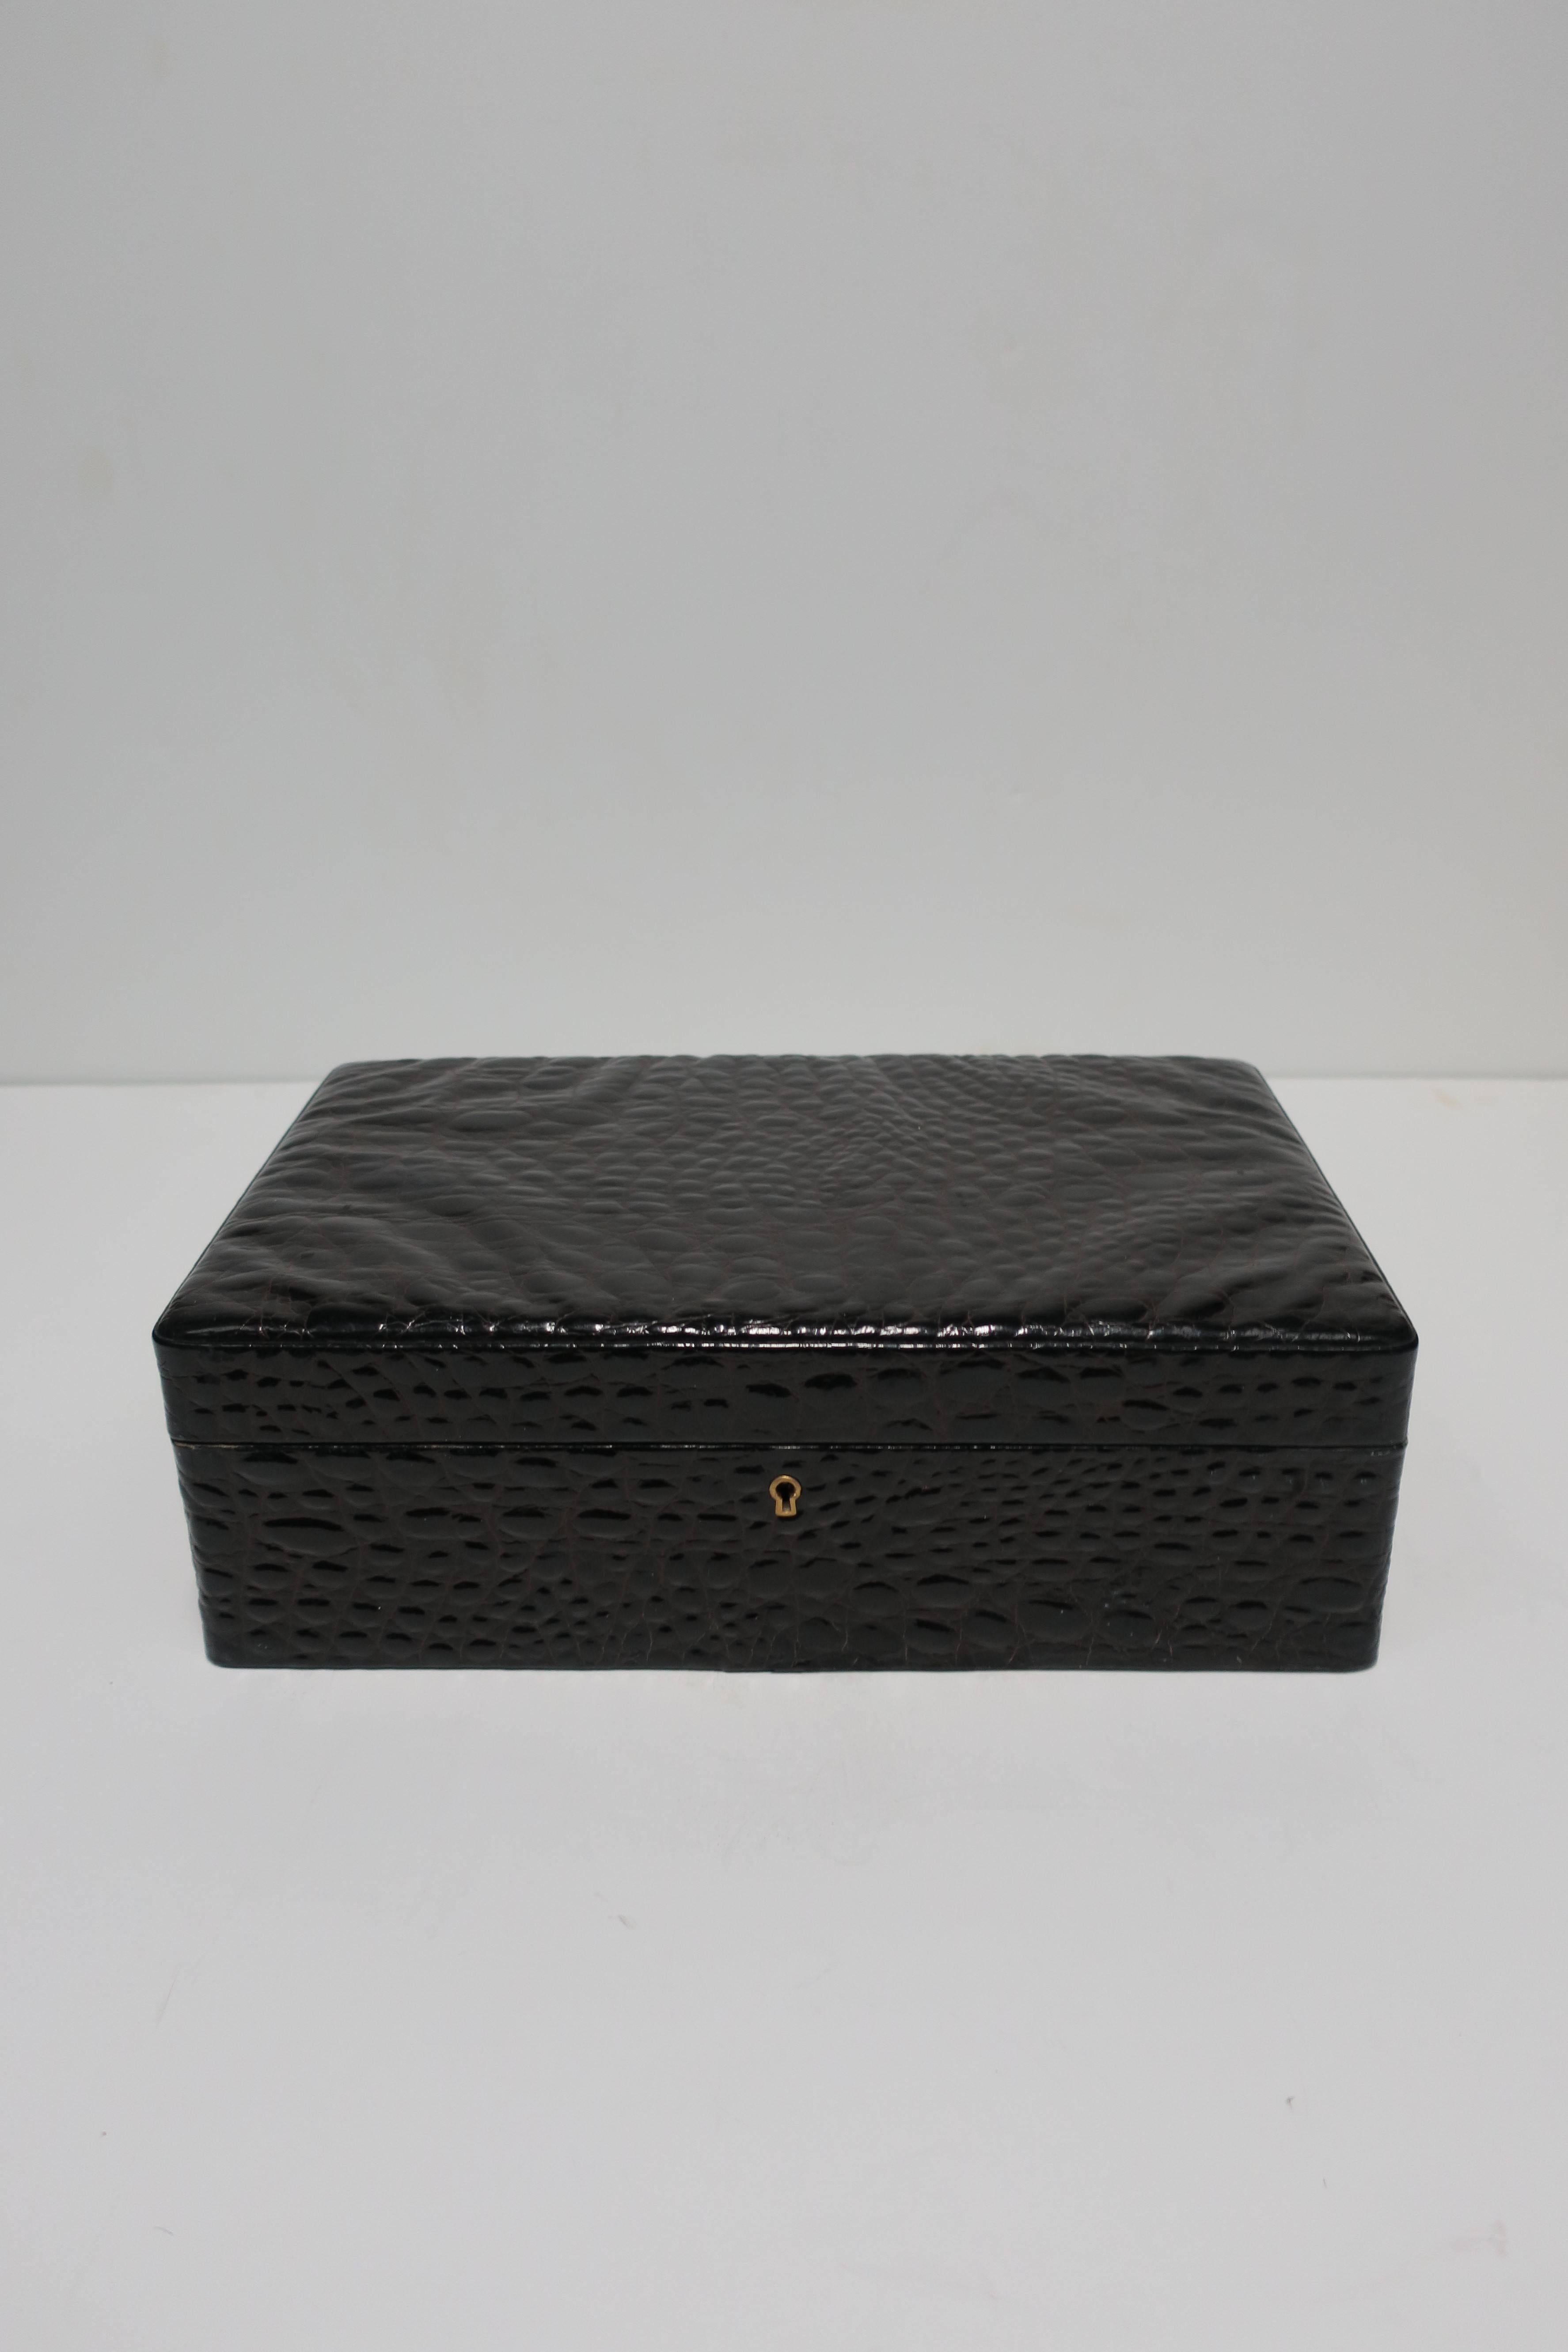 A beautiful large size vintage faux crocodile wrapped jewelry box. Box is dark brown faux patent crocodile on the outside; on the inside it's lined with light brown ultra-suede. Rectangular jewelry box has removable tray. 

Box measures: 13.25 in. W